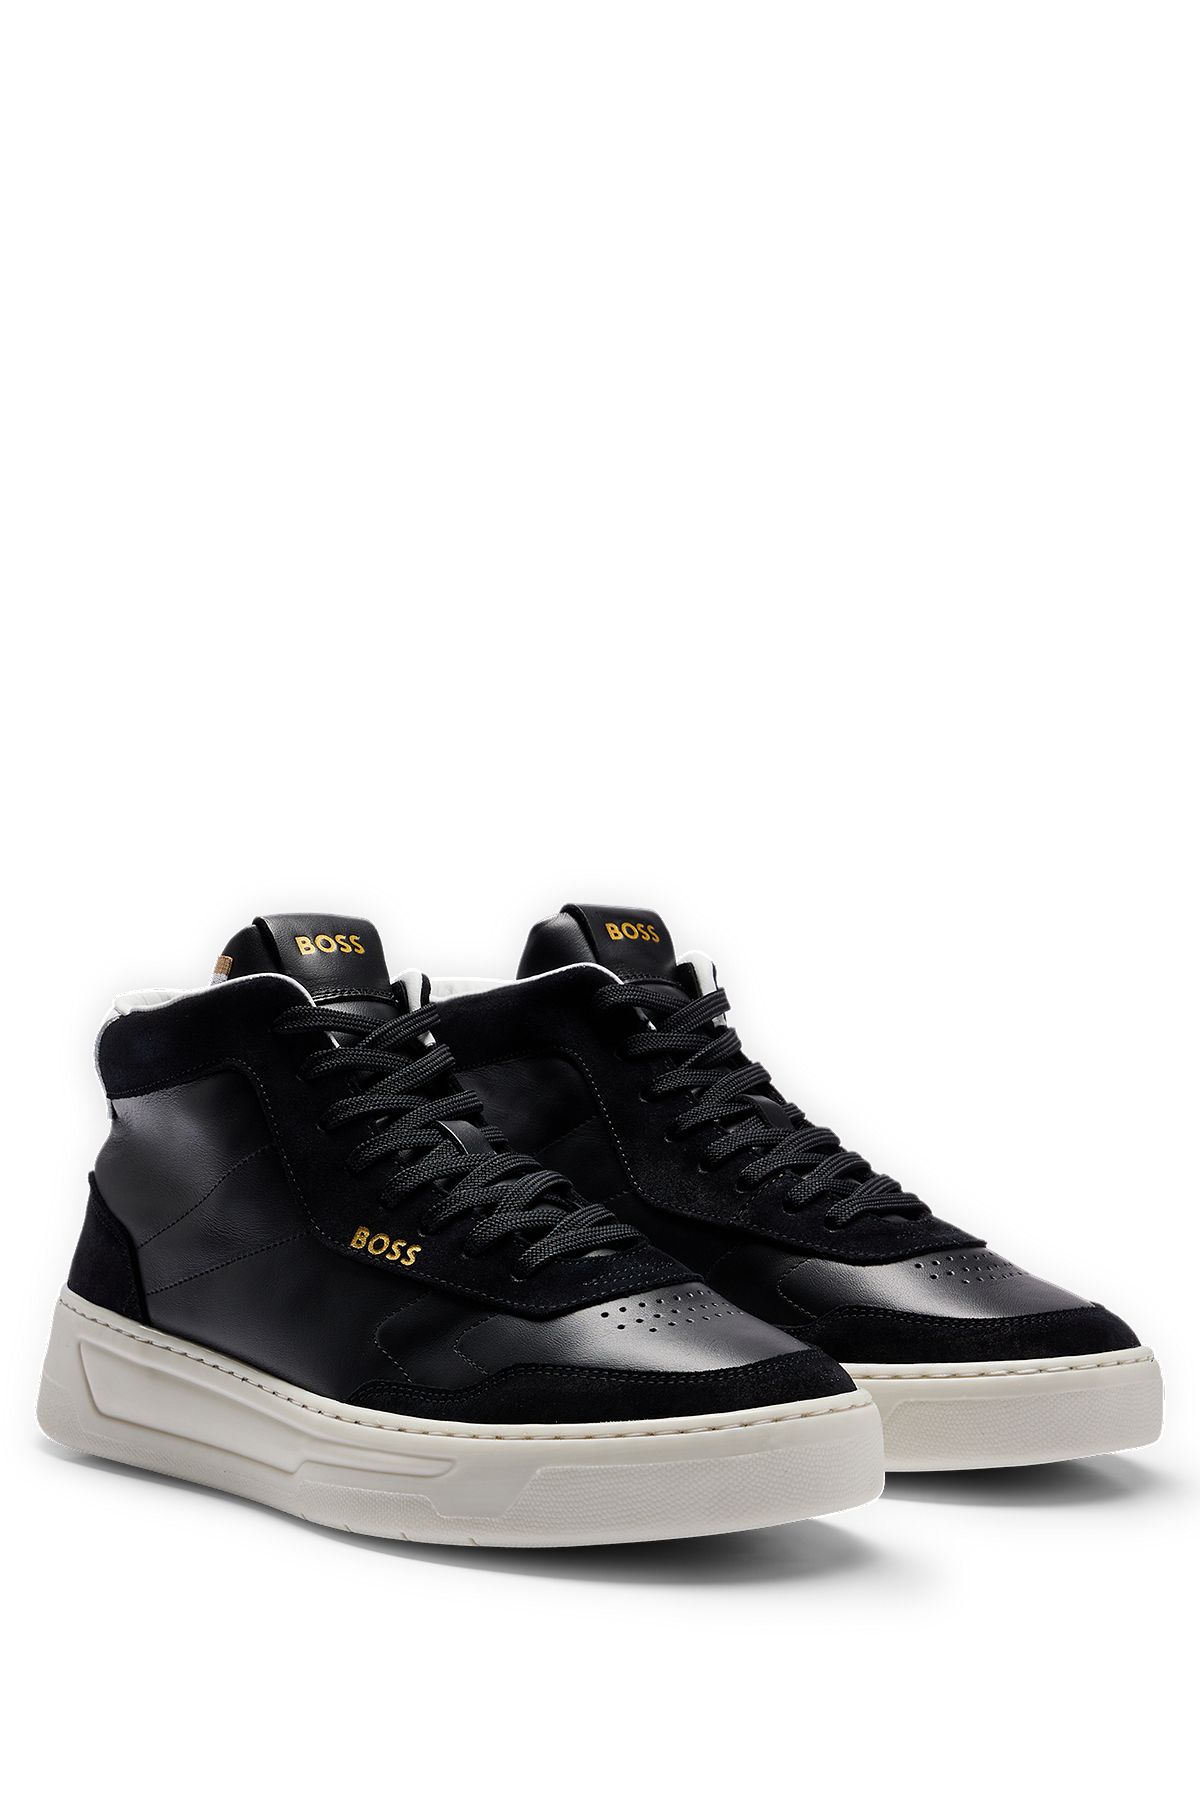 Mid-top trainers in leather and suede, Black